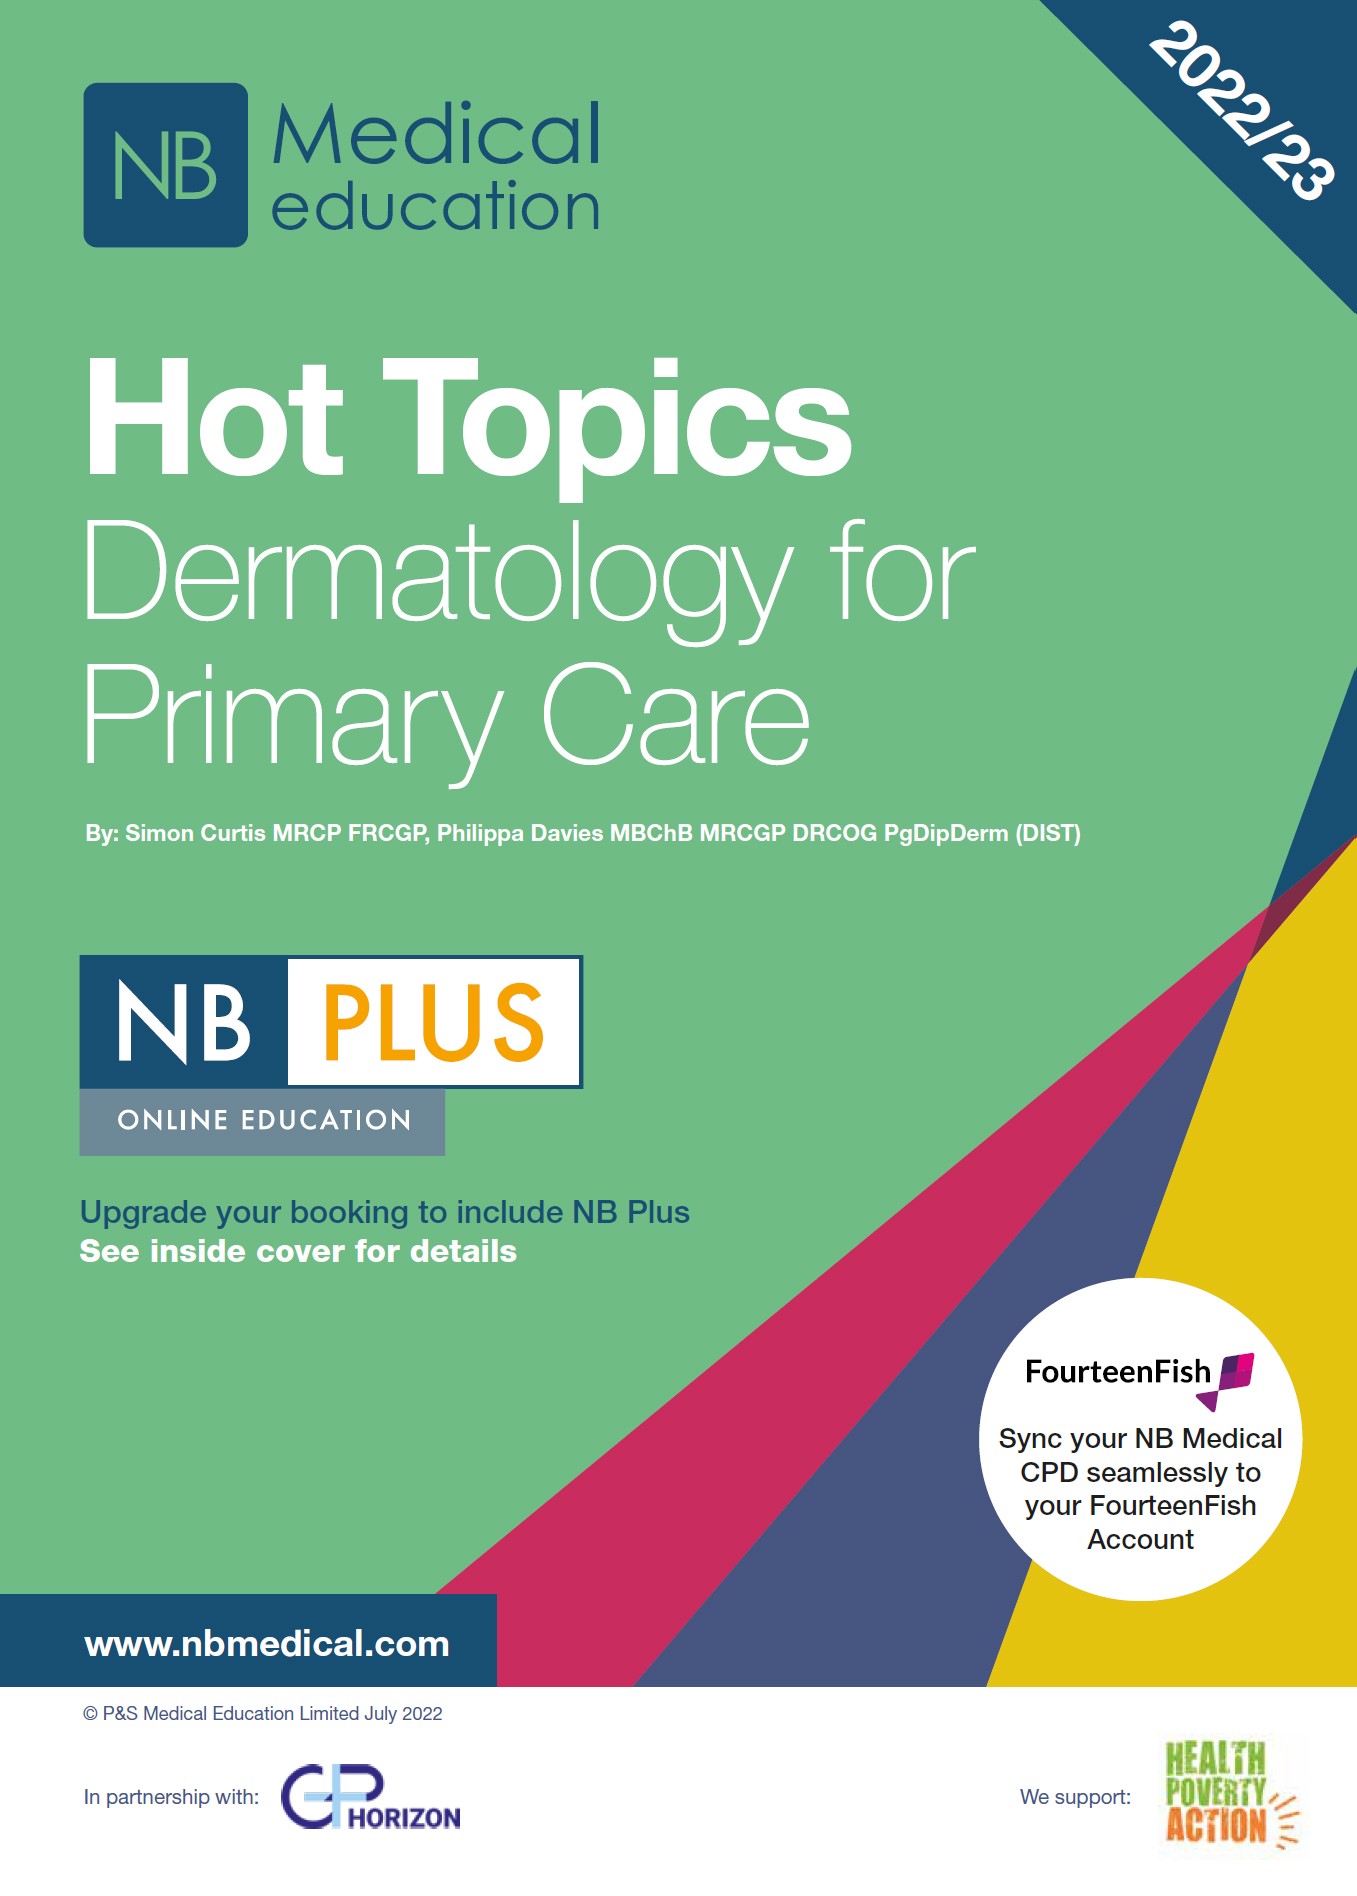 Hot Topics Dermatology in Primary Care 2022-2023 Booklet